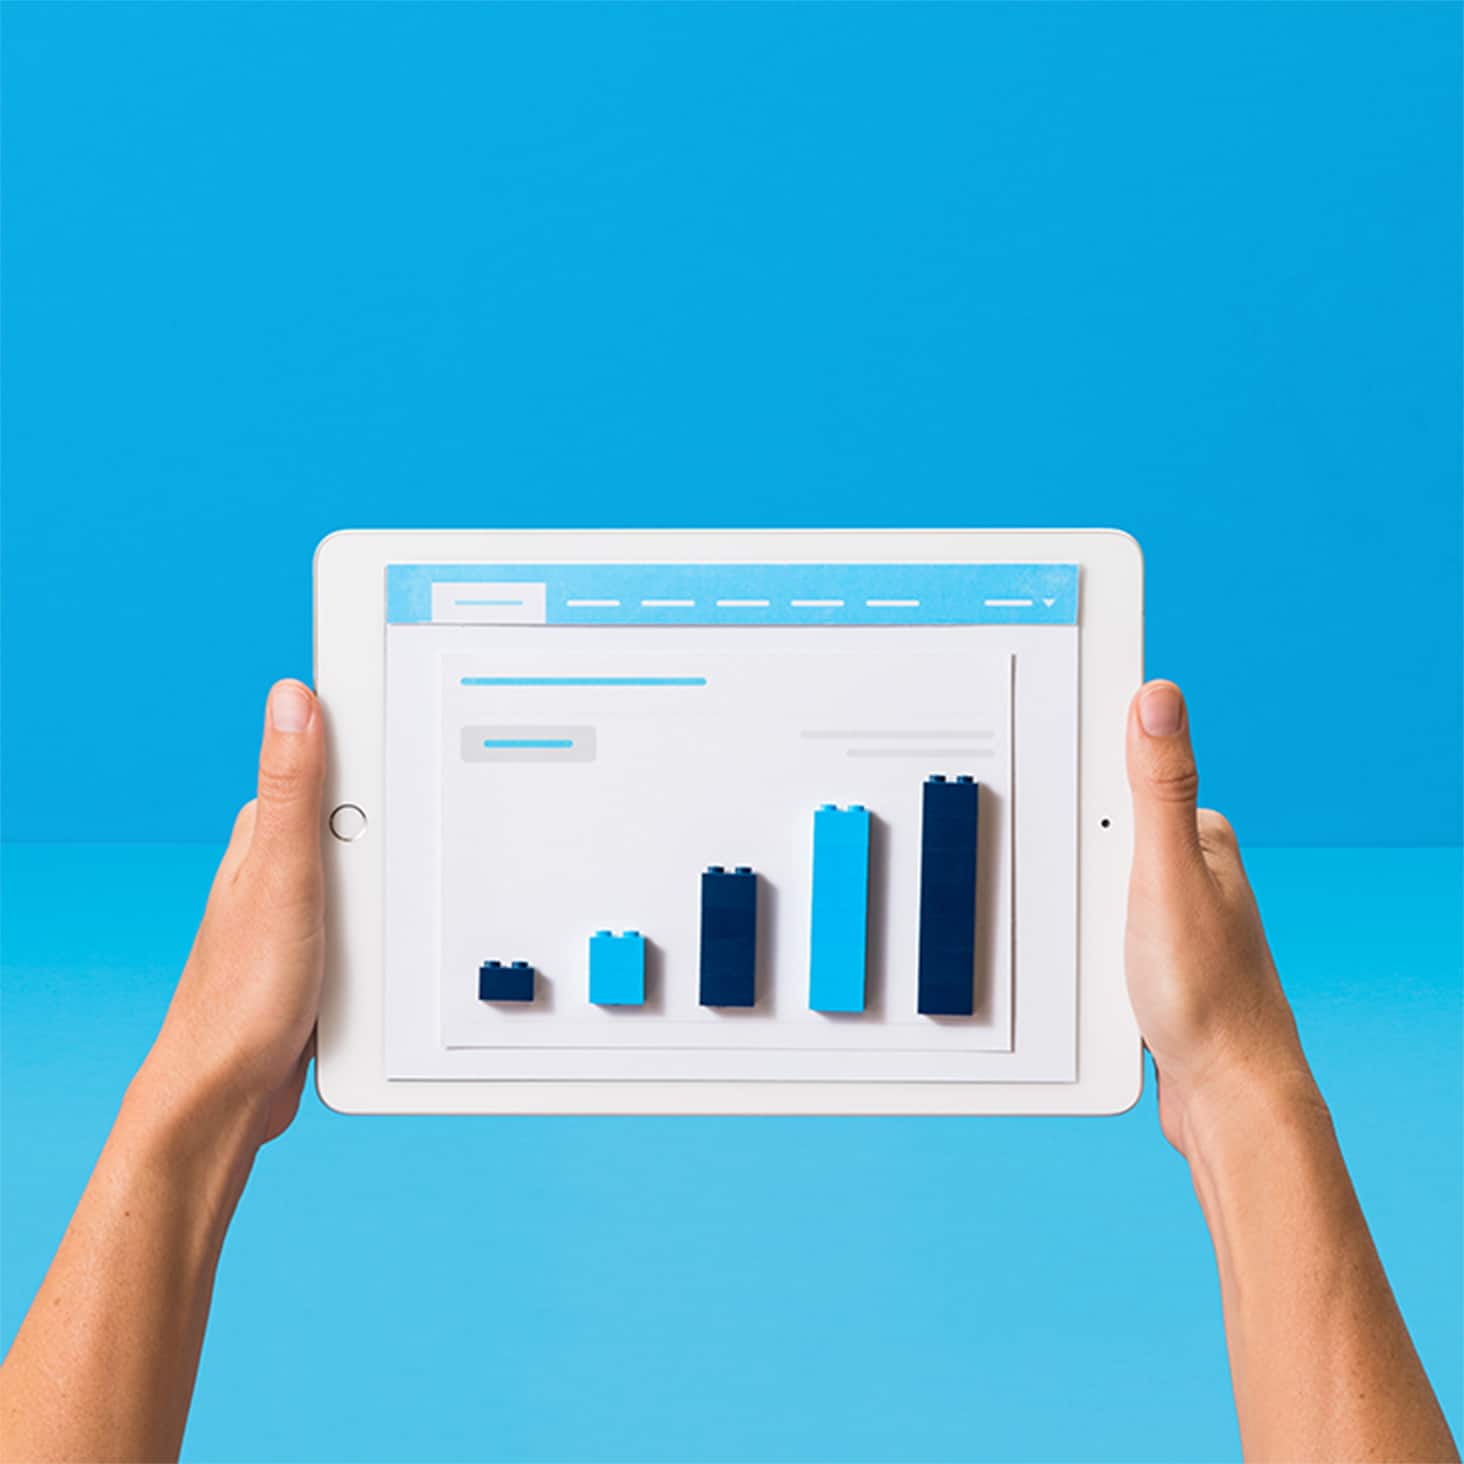 A chart of income and expenses displays in Xero’s online accounting software on a tablet.